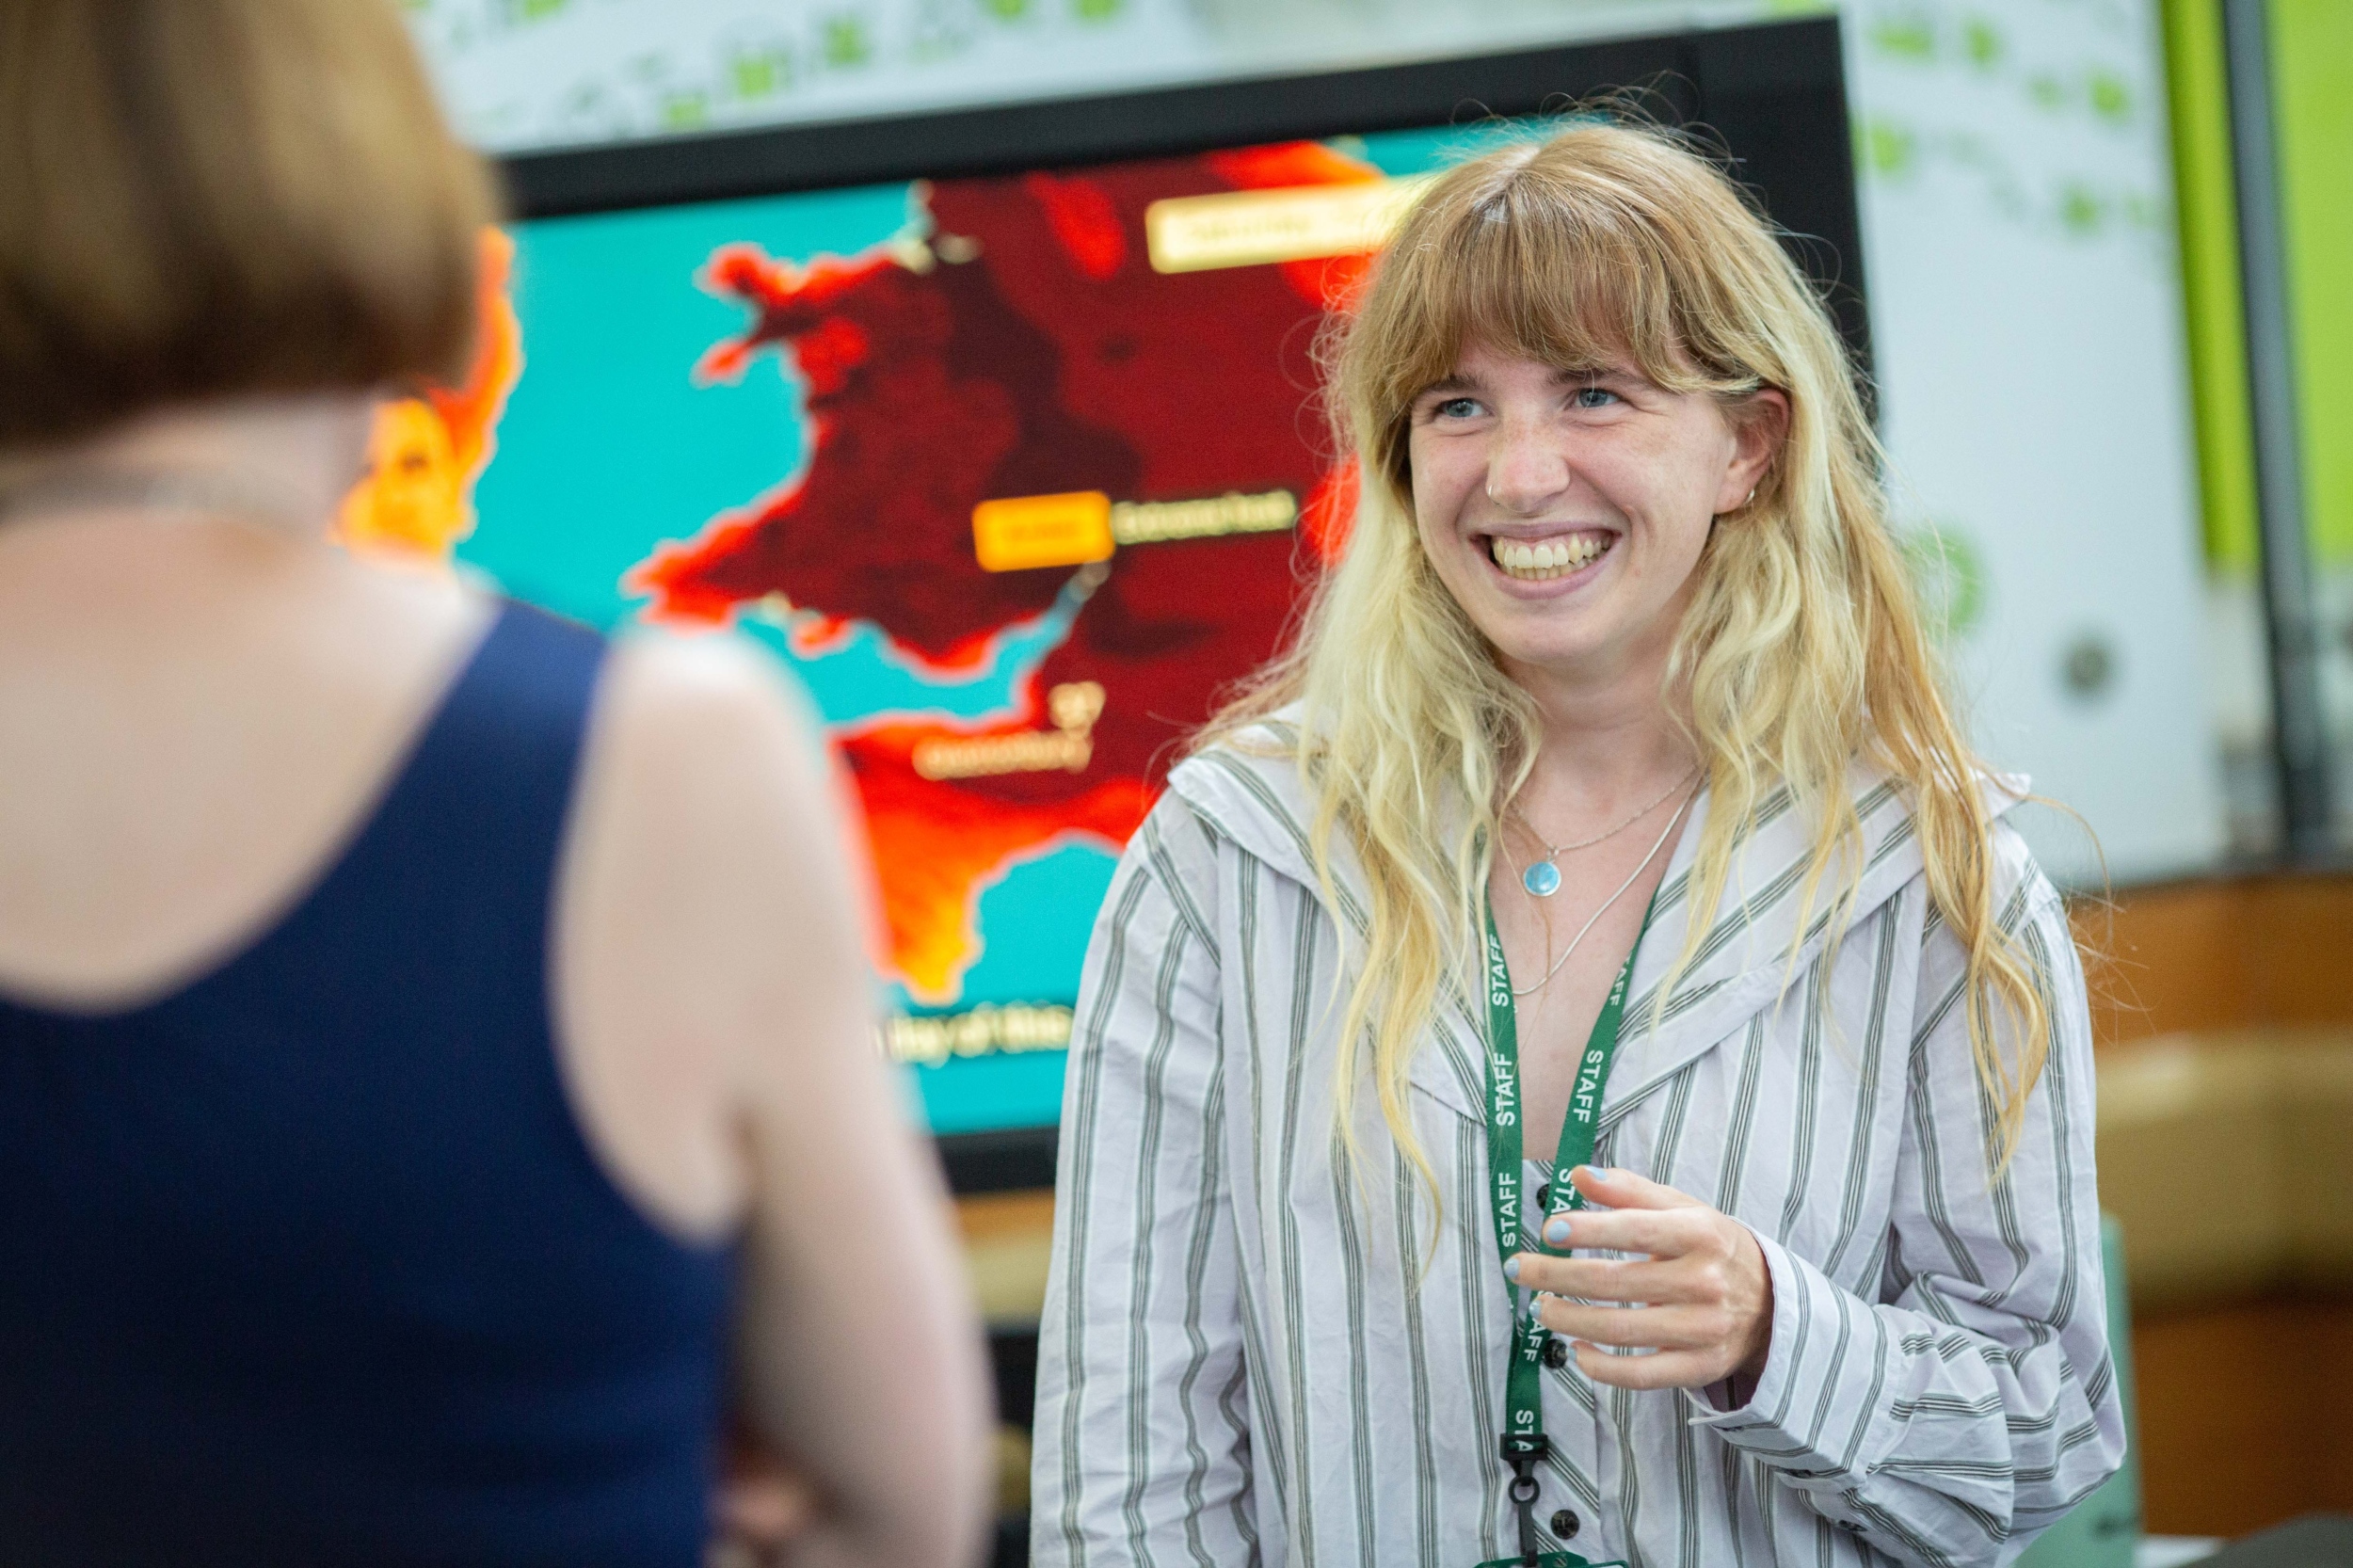 This image shows a person smiling at someone else who is partially in view. There is a weather map in the background.